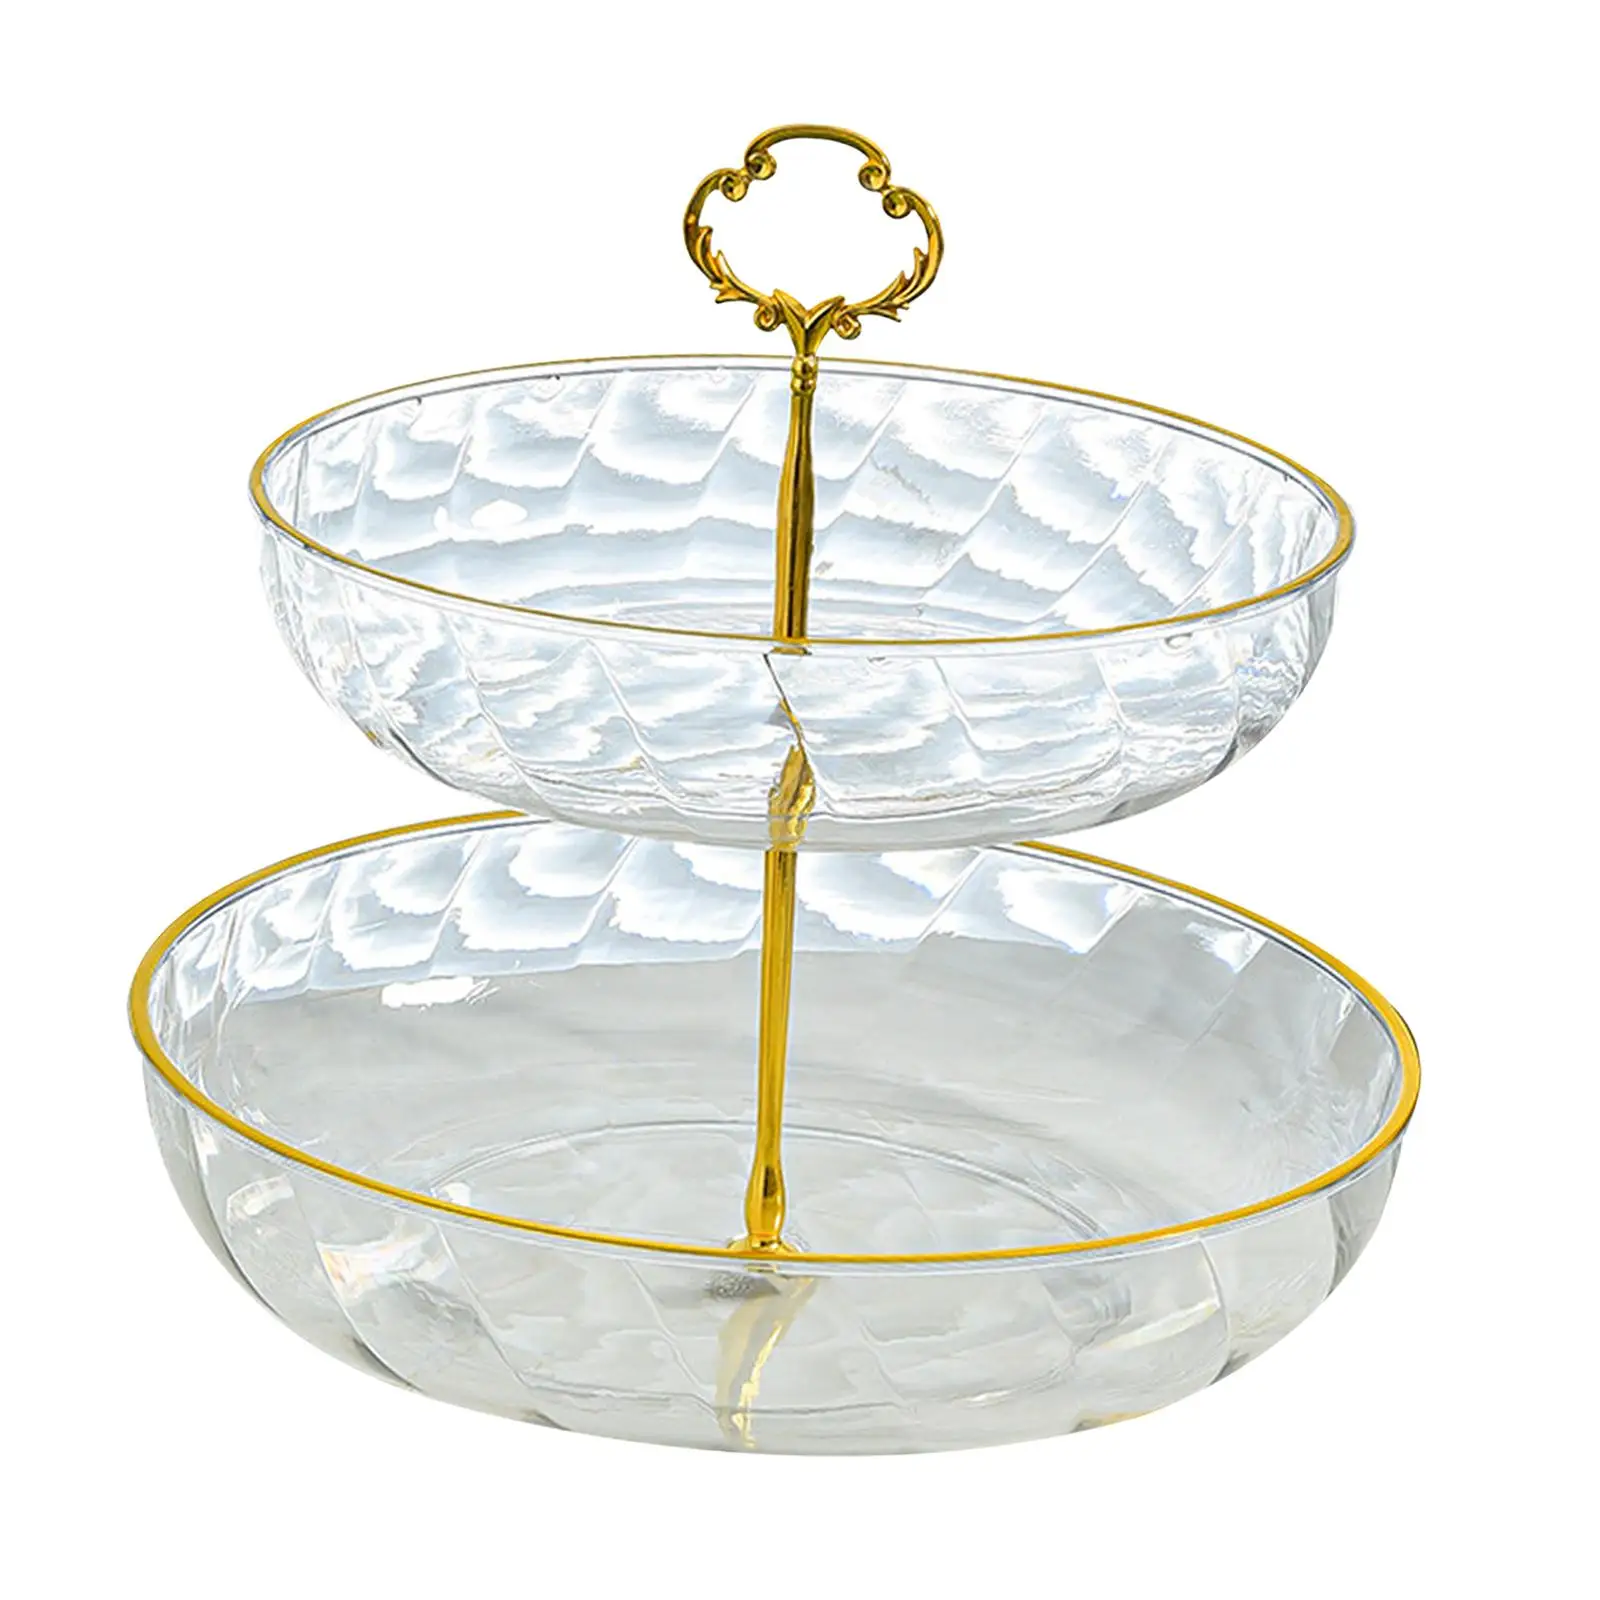 Cake Stand 2 Tier Table Pastry Holder for Home Decor Kitchen Dining Room